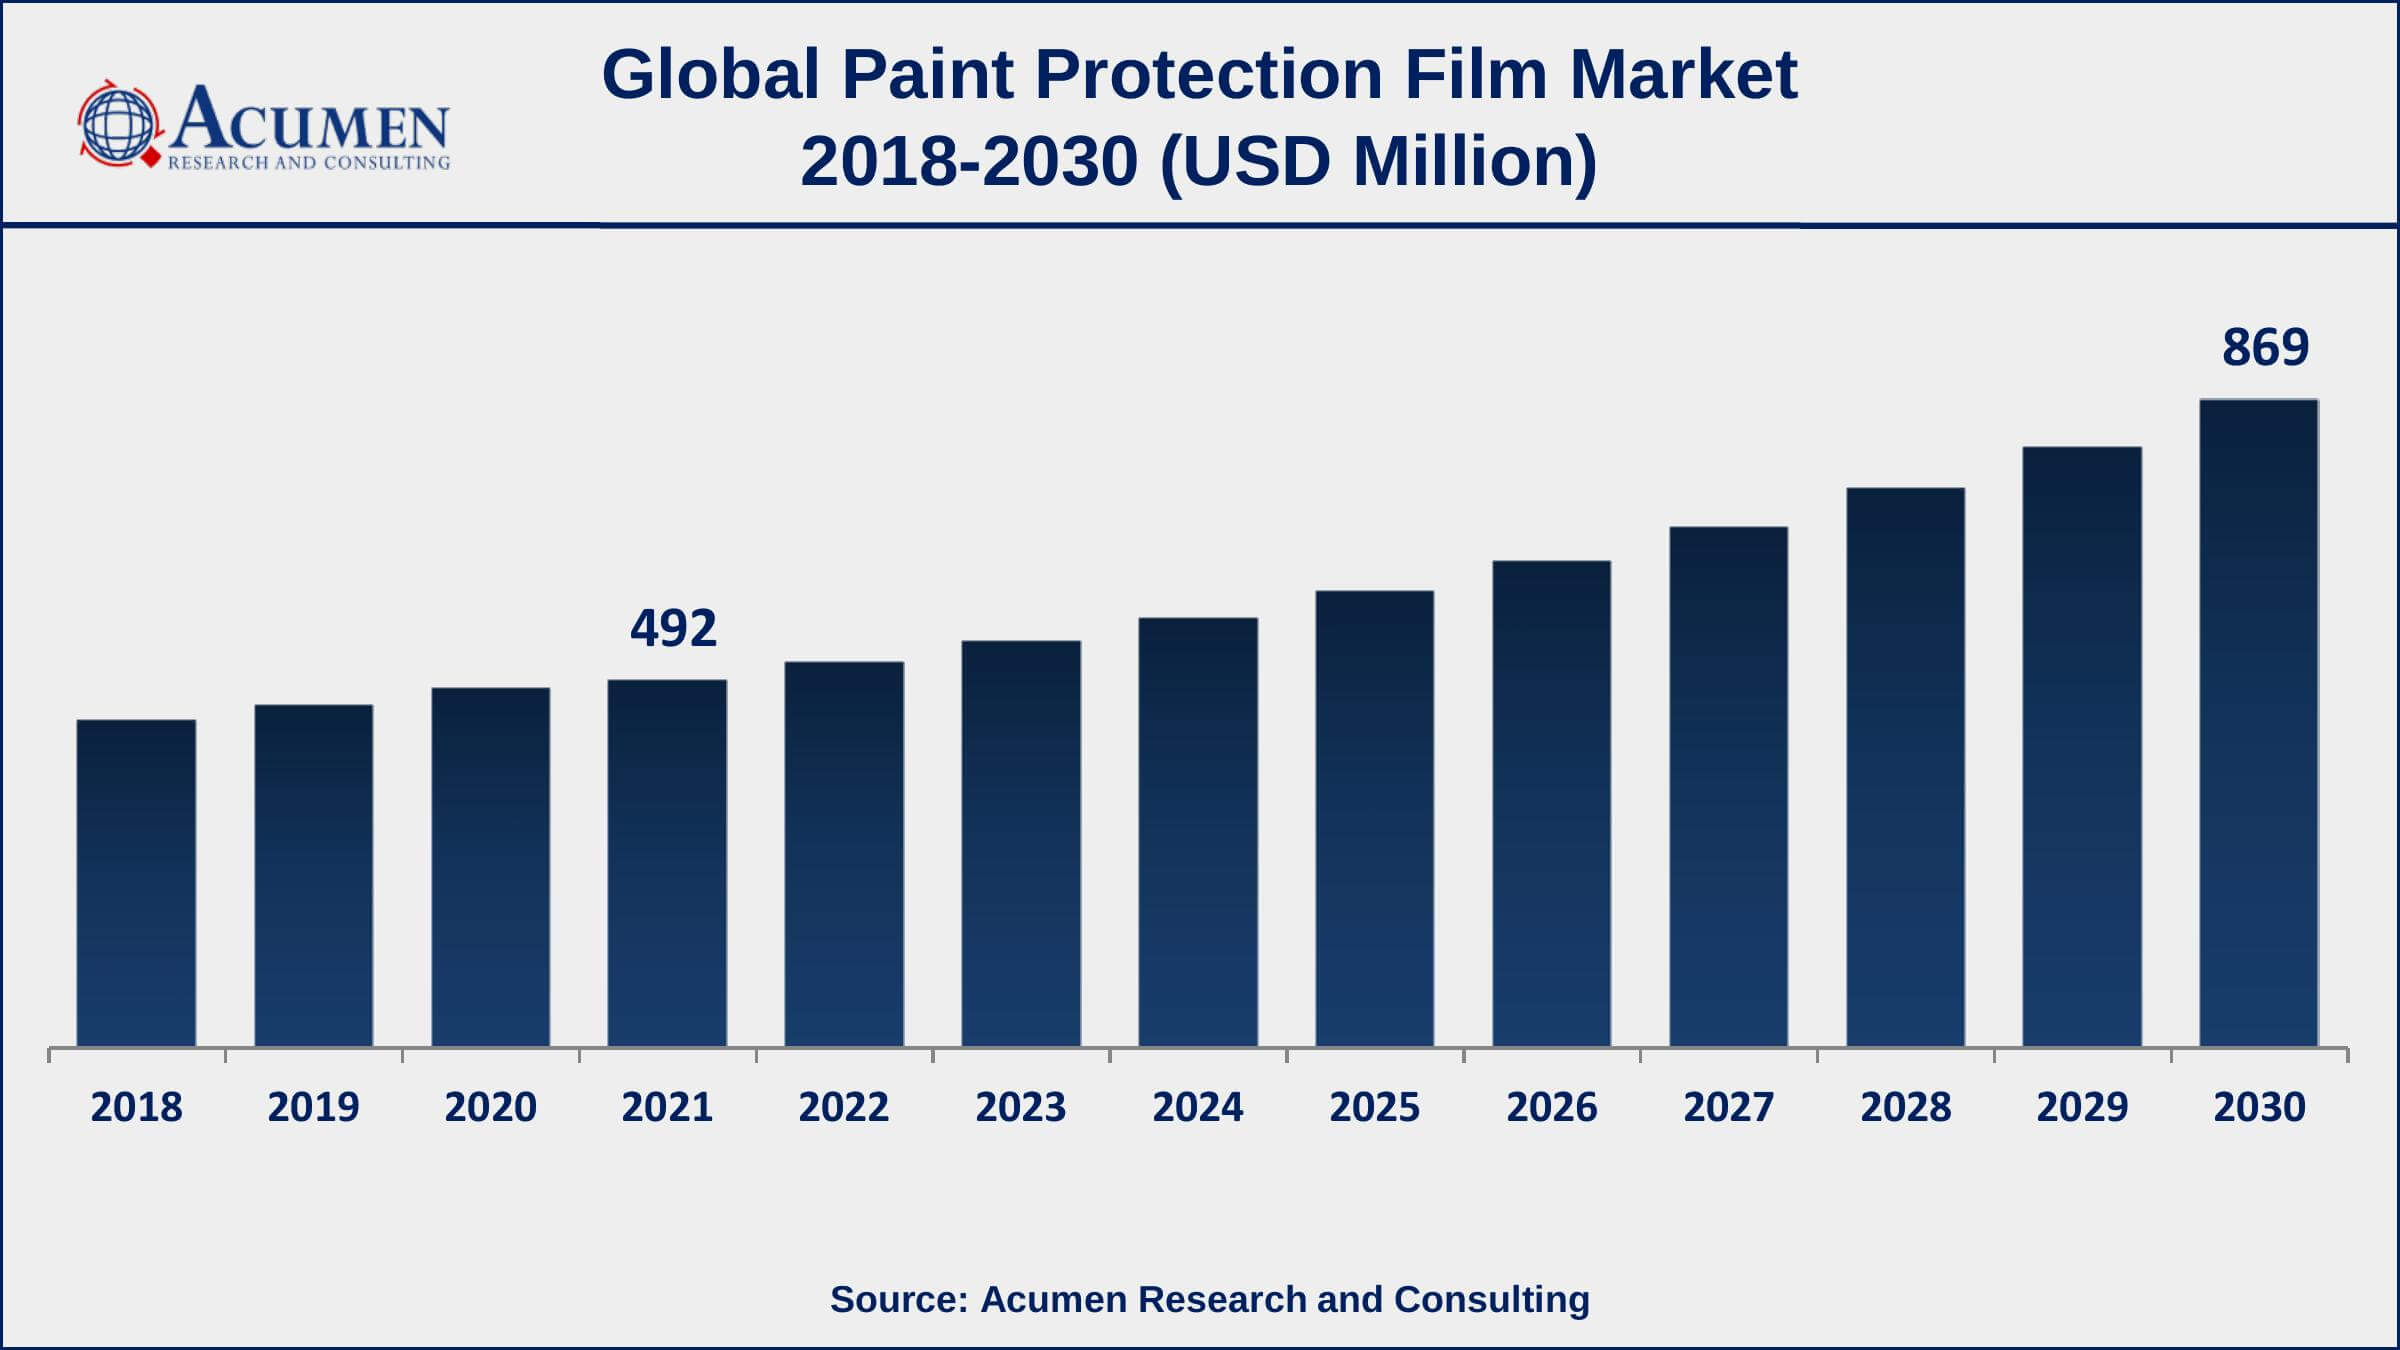 Europe paint protection film market growth will observe highest CAGR from 2022 to 2030